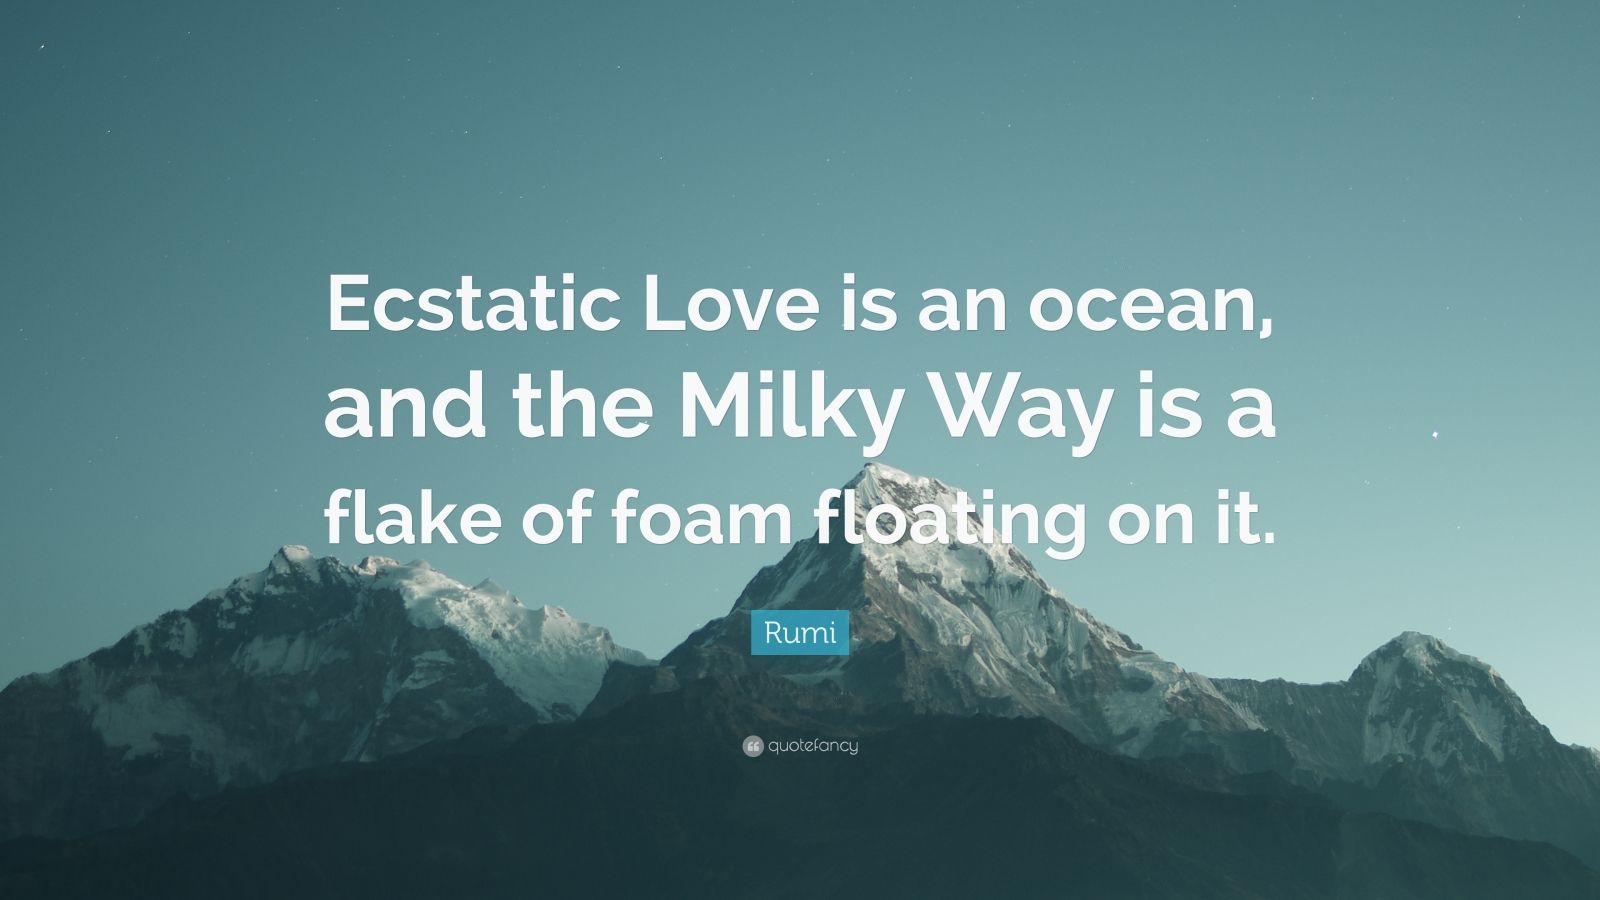 Rumi Quote: "Ecstatic Love is an ocean, and the Milky Way is a flake of foam floating on it."